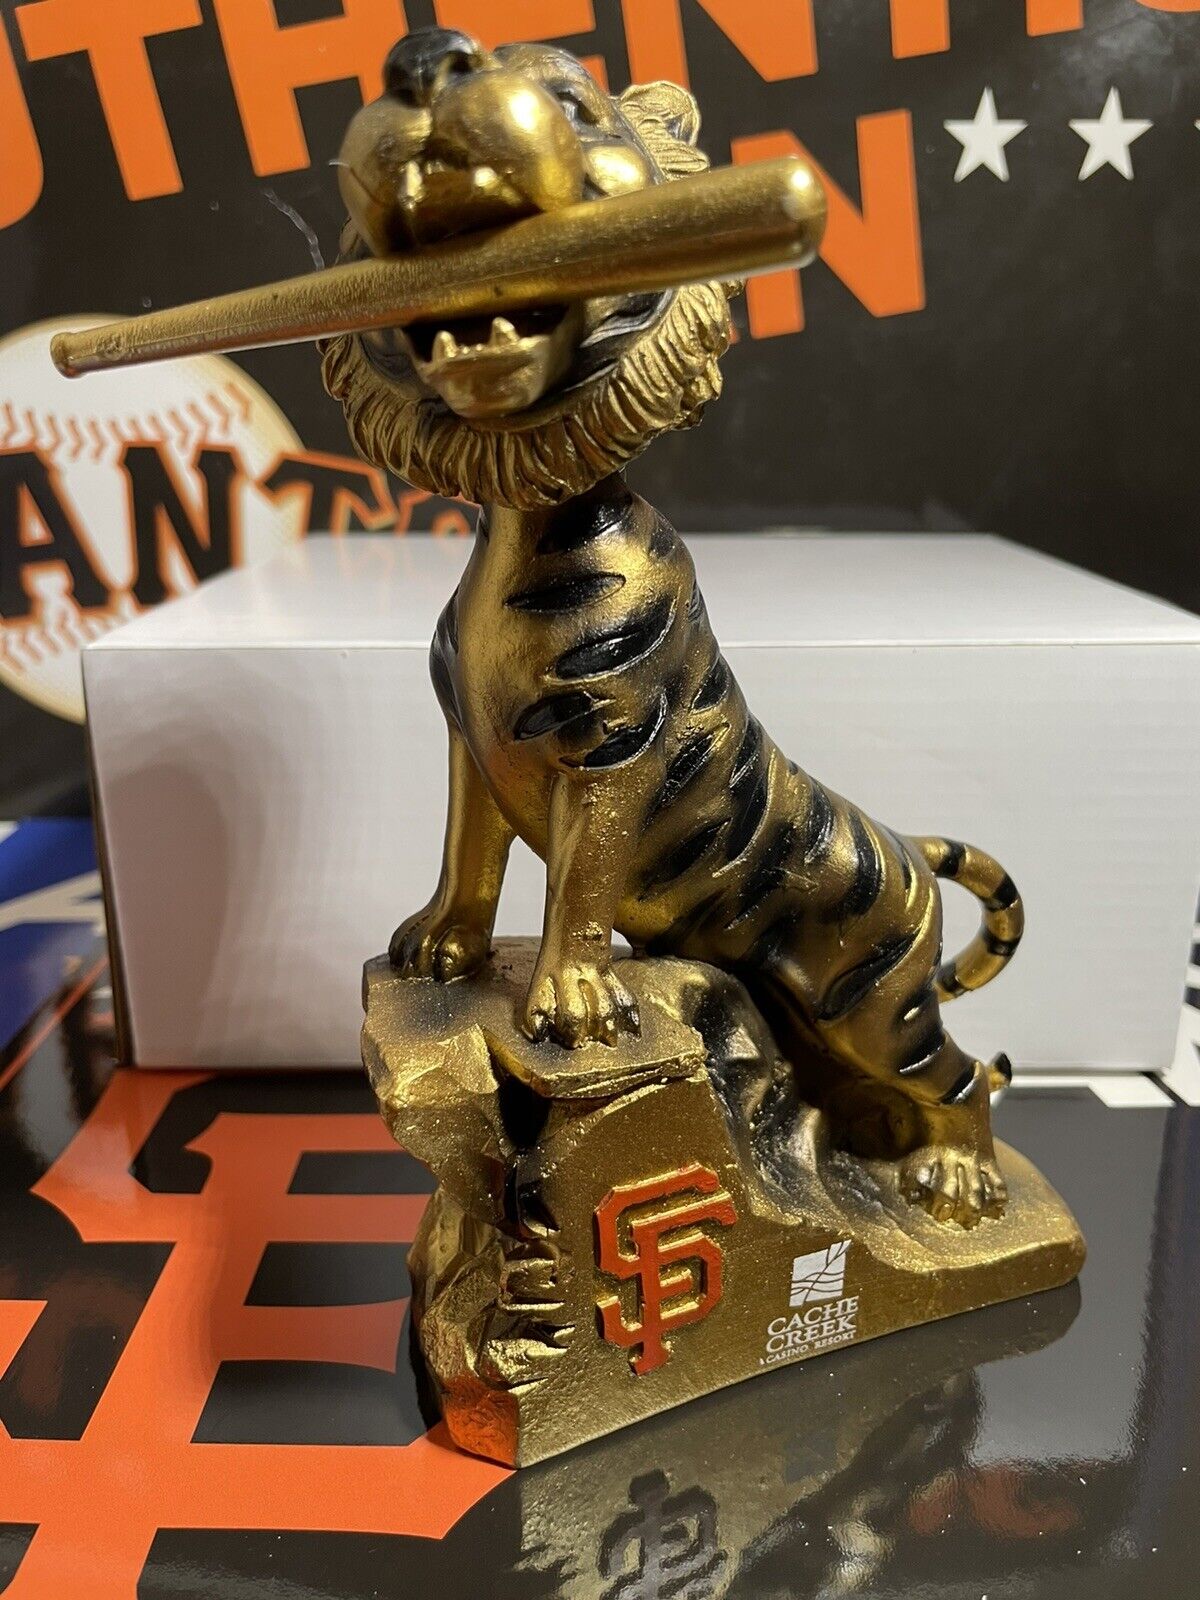 2022 SF GIANTS Year of The Tiger Bobblehead Chinese Heritage